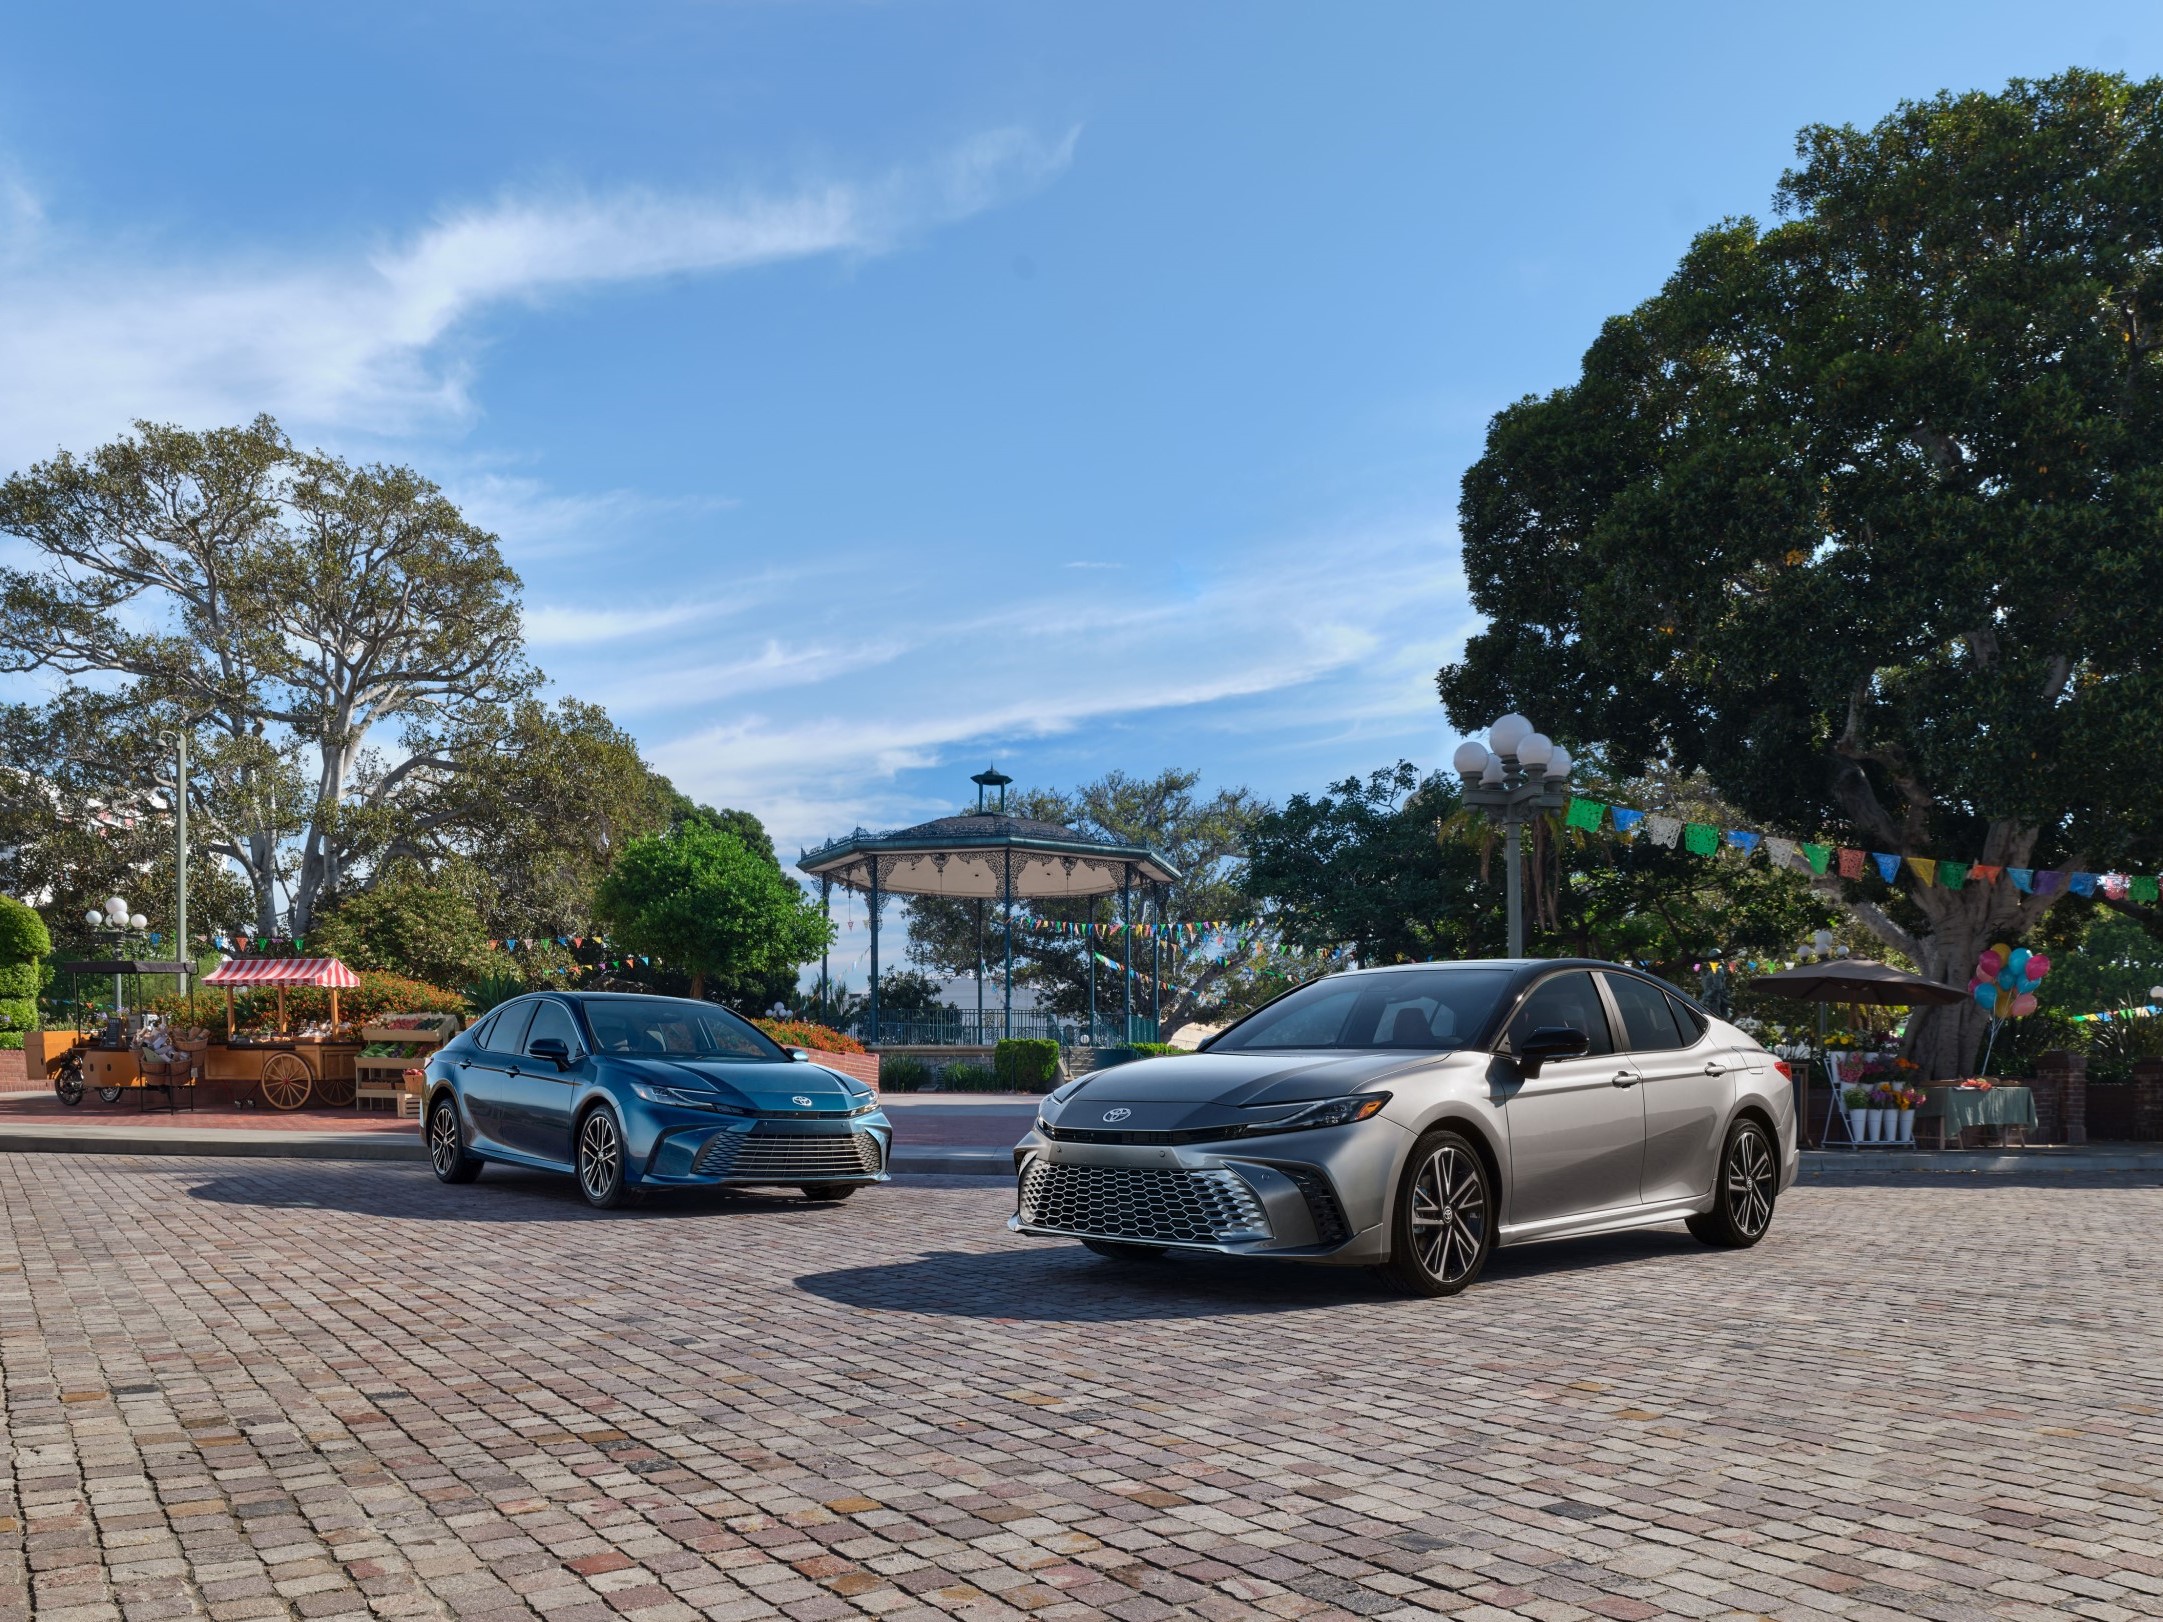 2025 Toyota Camry XLE in Reservoir Blue next to a 2025 Toyota Camry XSE in Celestial Silver Metallic both with Hammerhead Headlamps on display in an open park